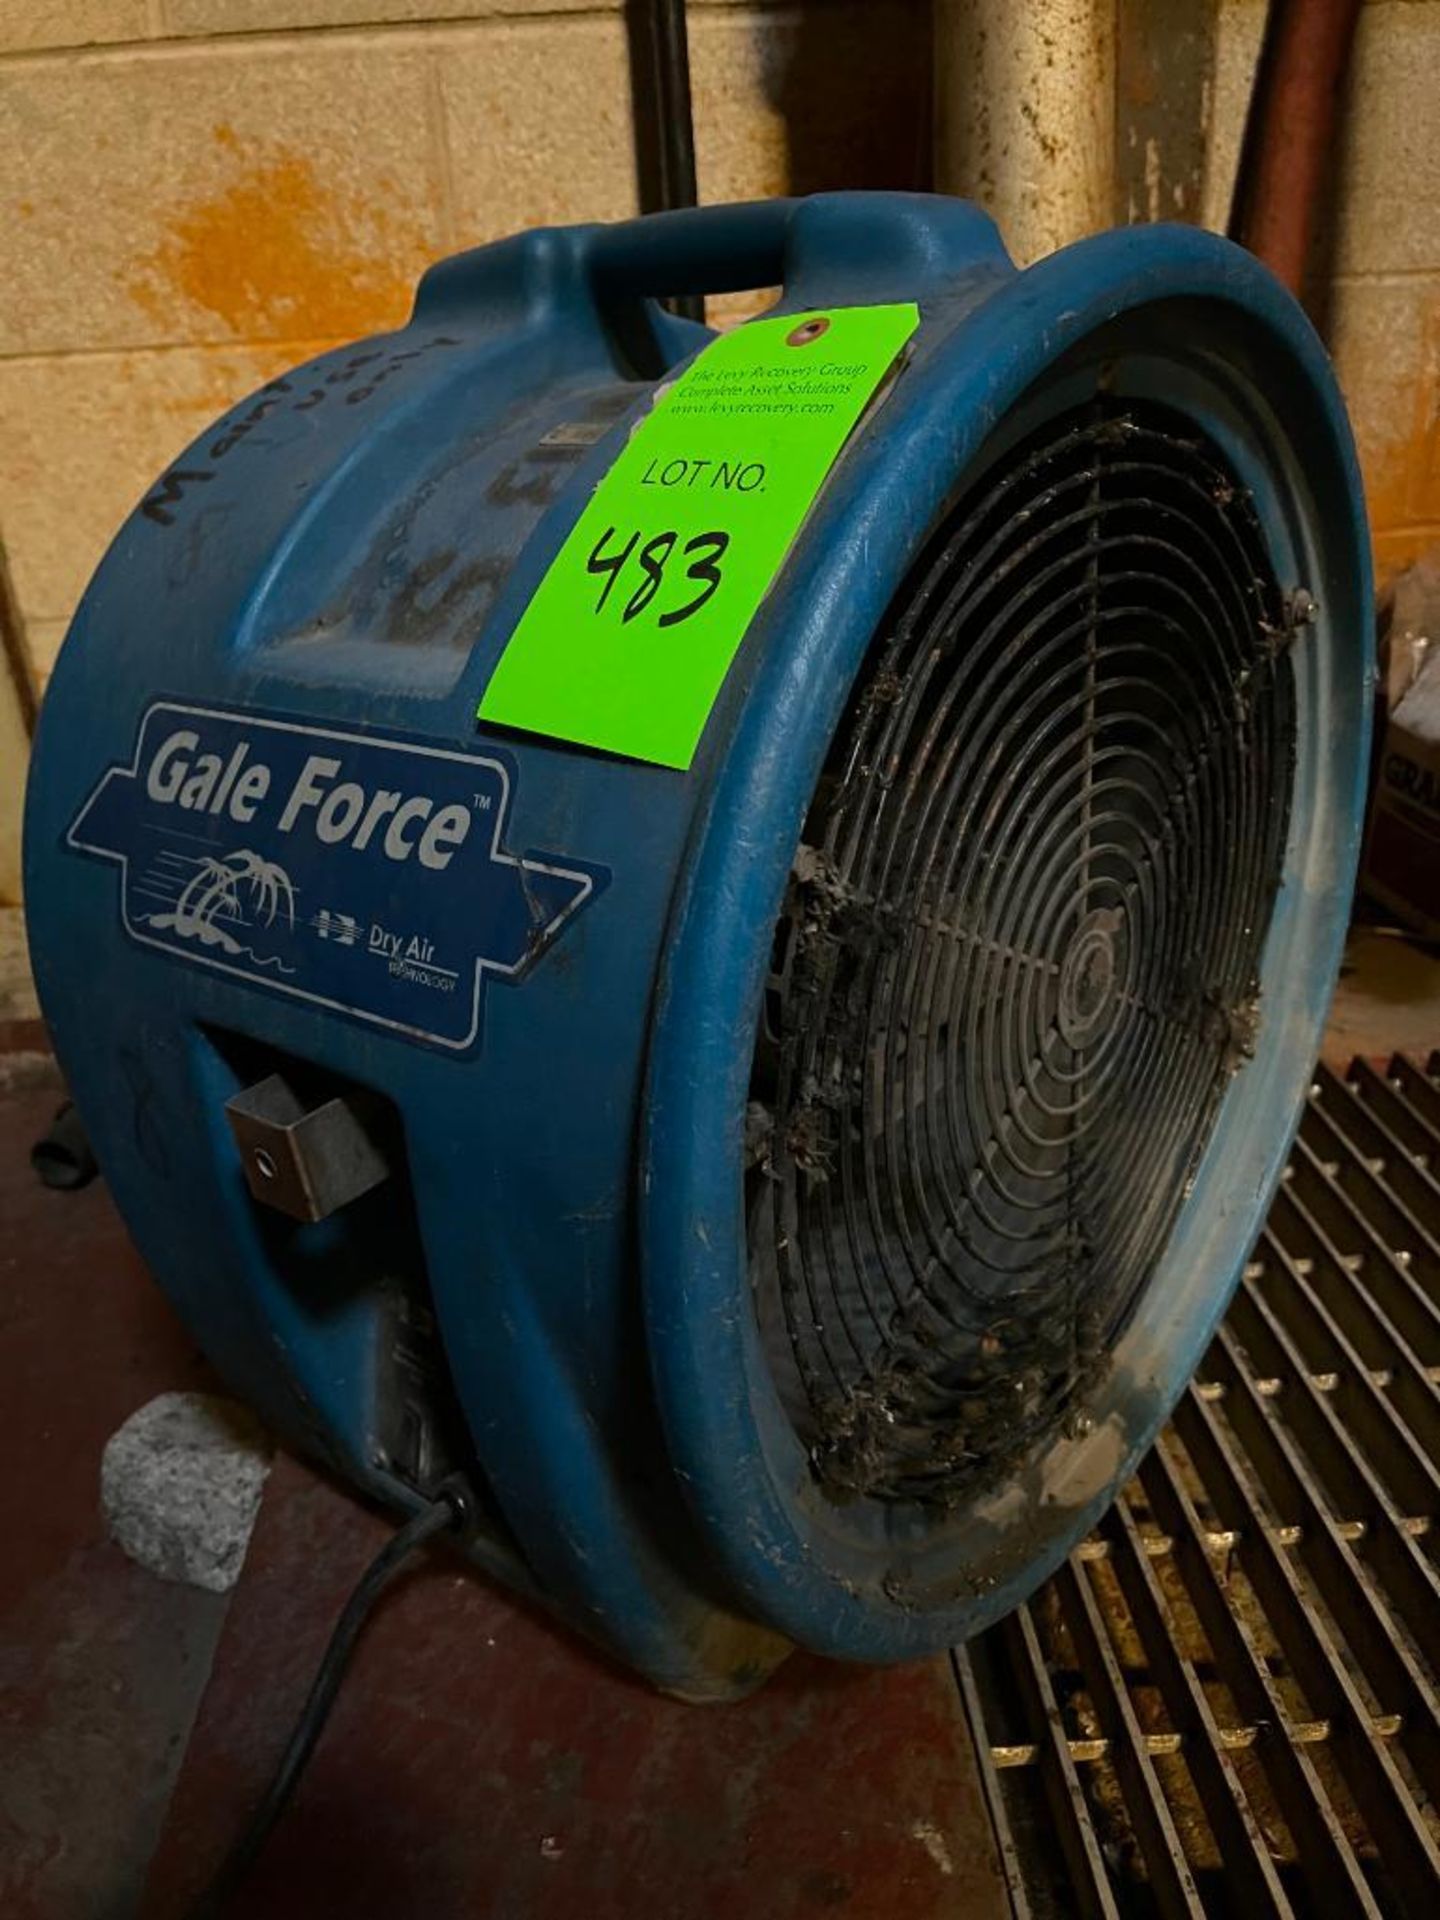 Gale Force Dry Air Blower